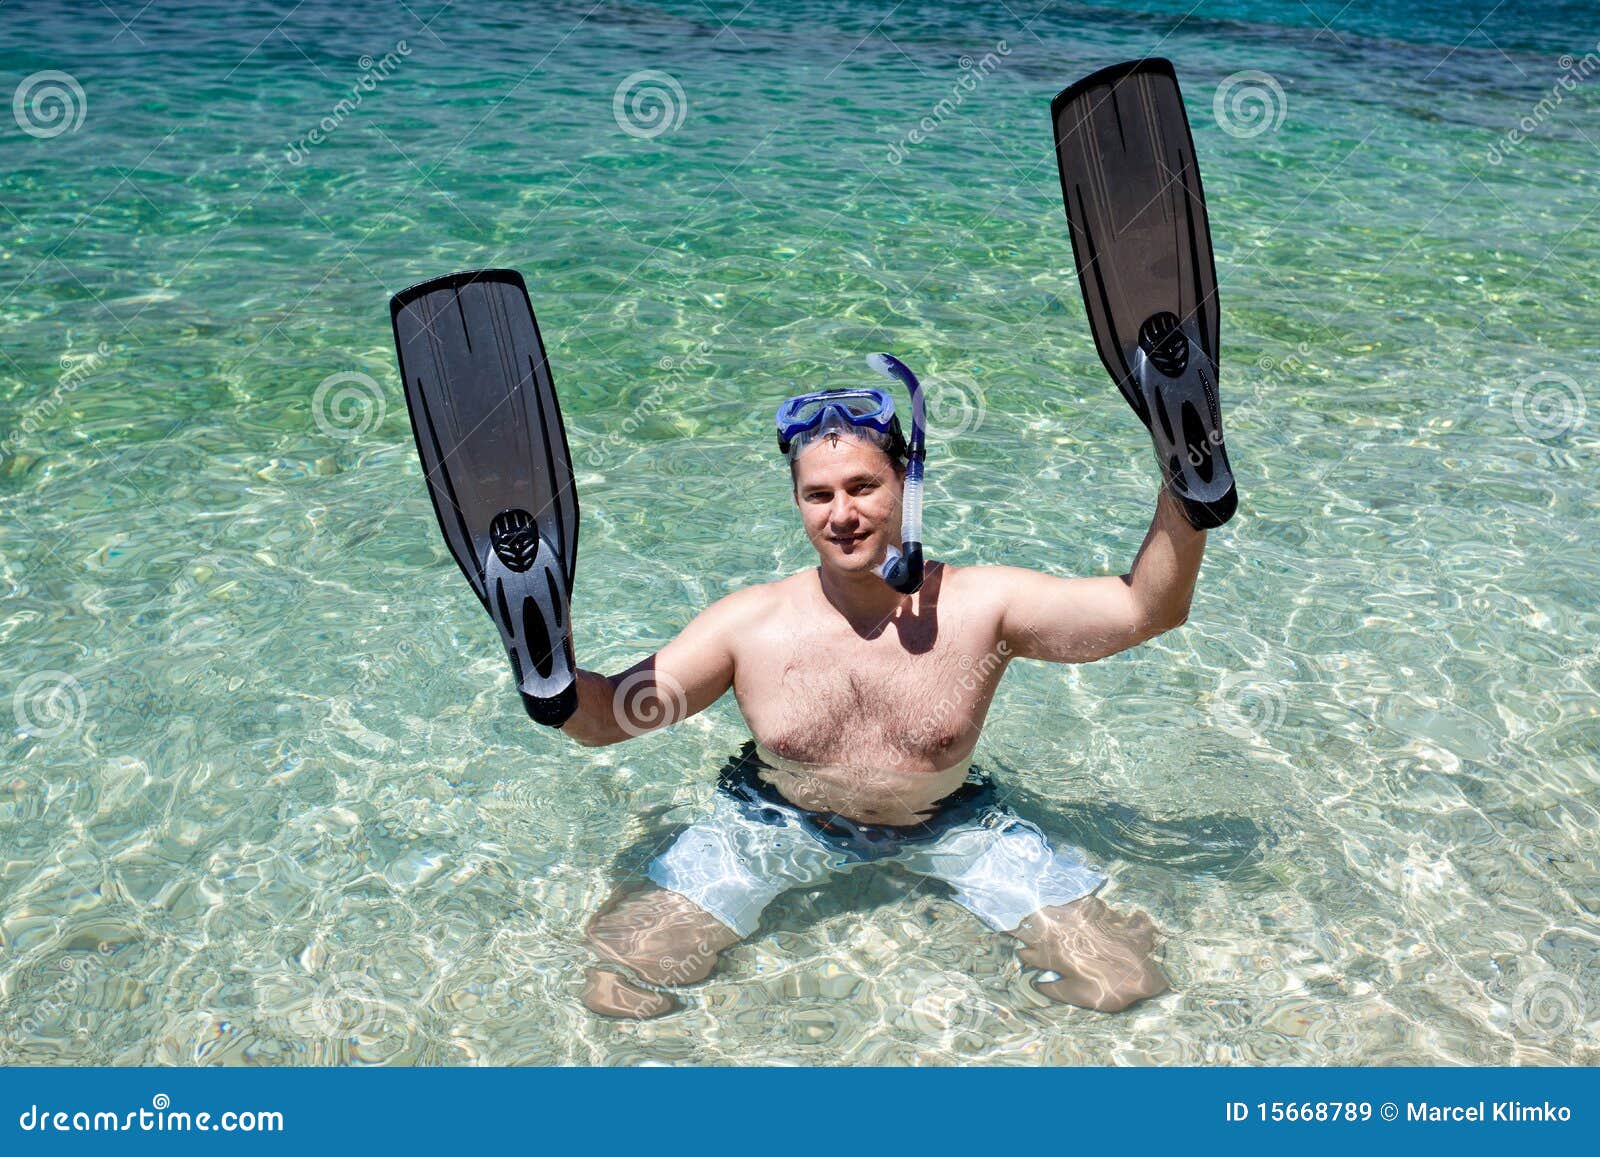 man with fins on the hands